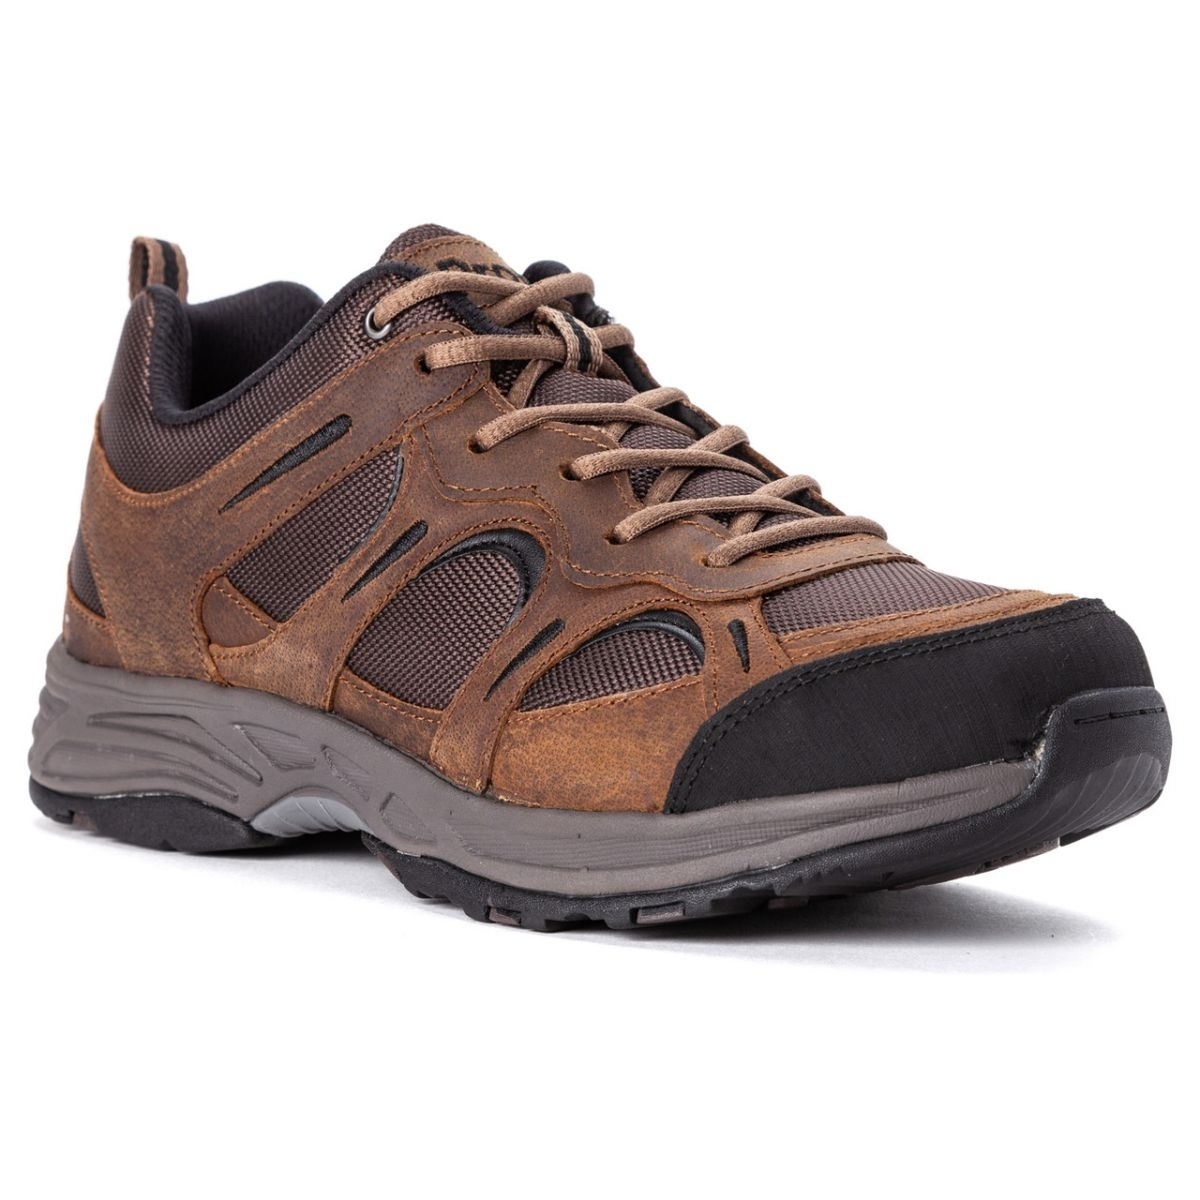 Propet Men's Connelly Hiking Shoe Brown - M5503BR BROWN - BROWN, 15-3E